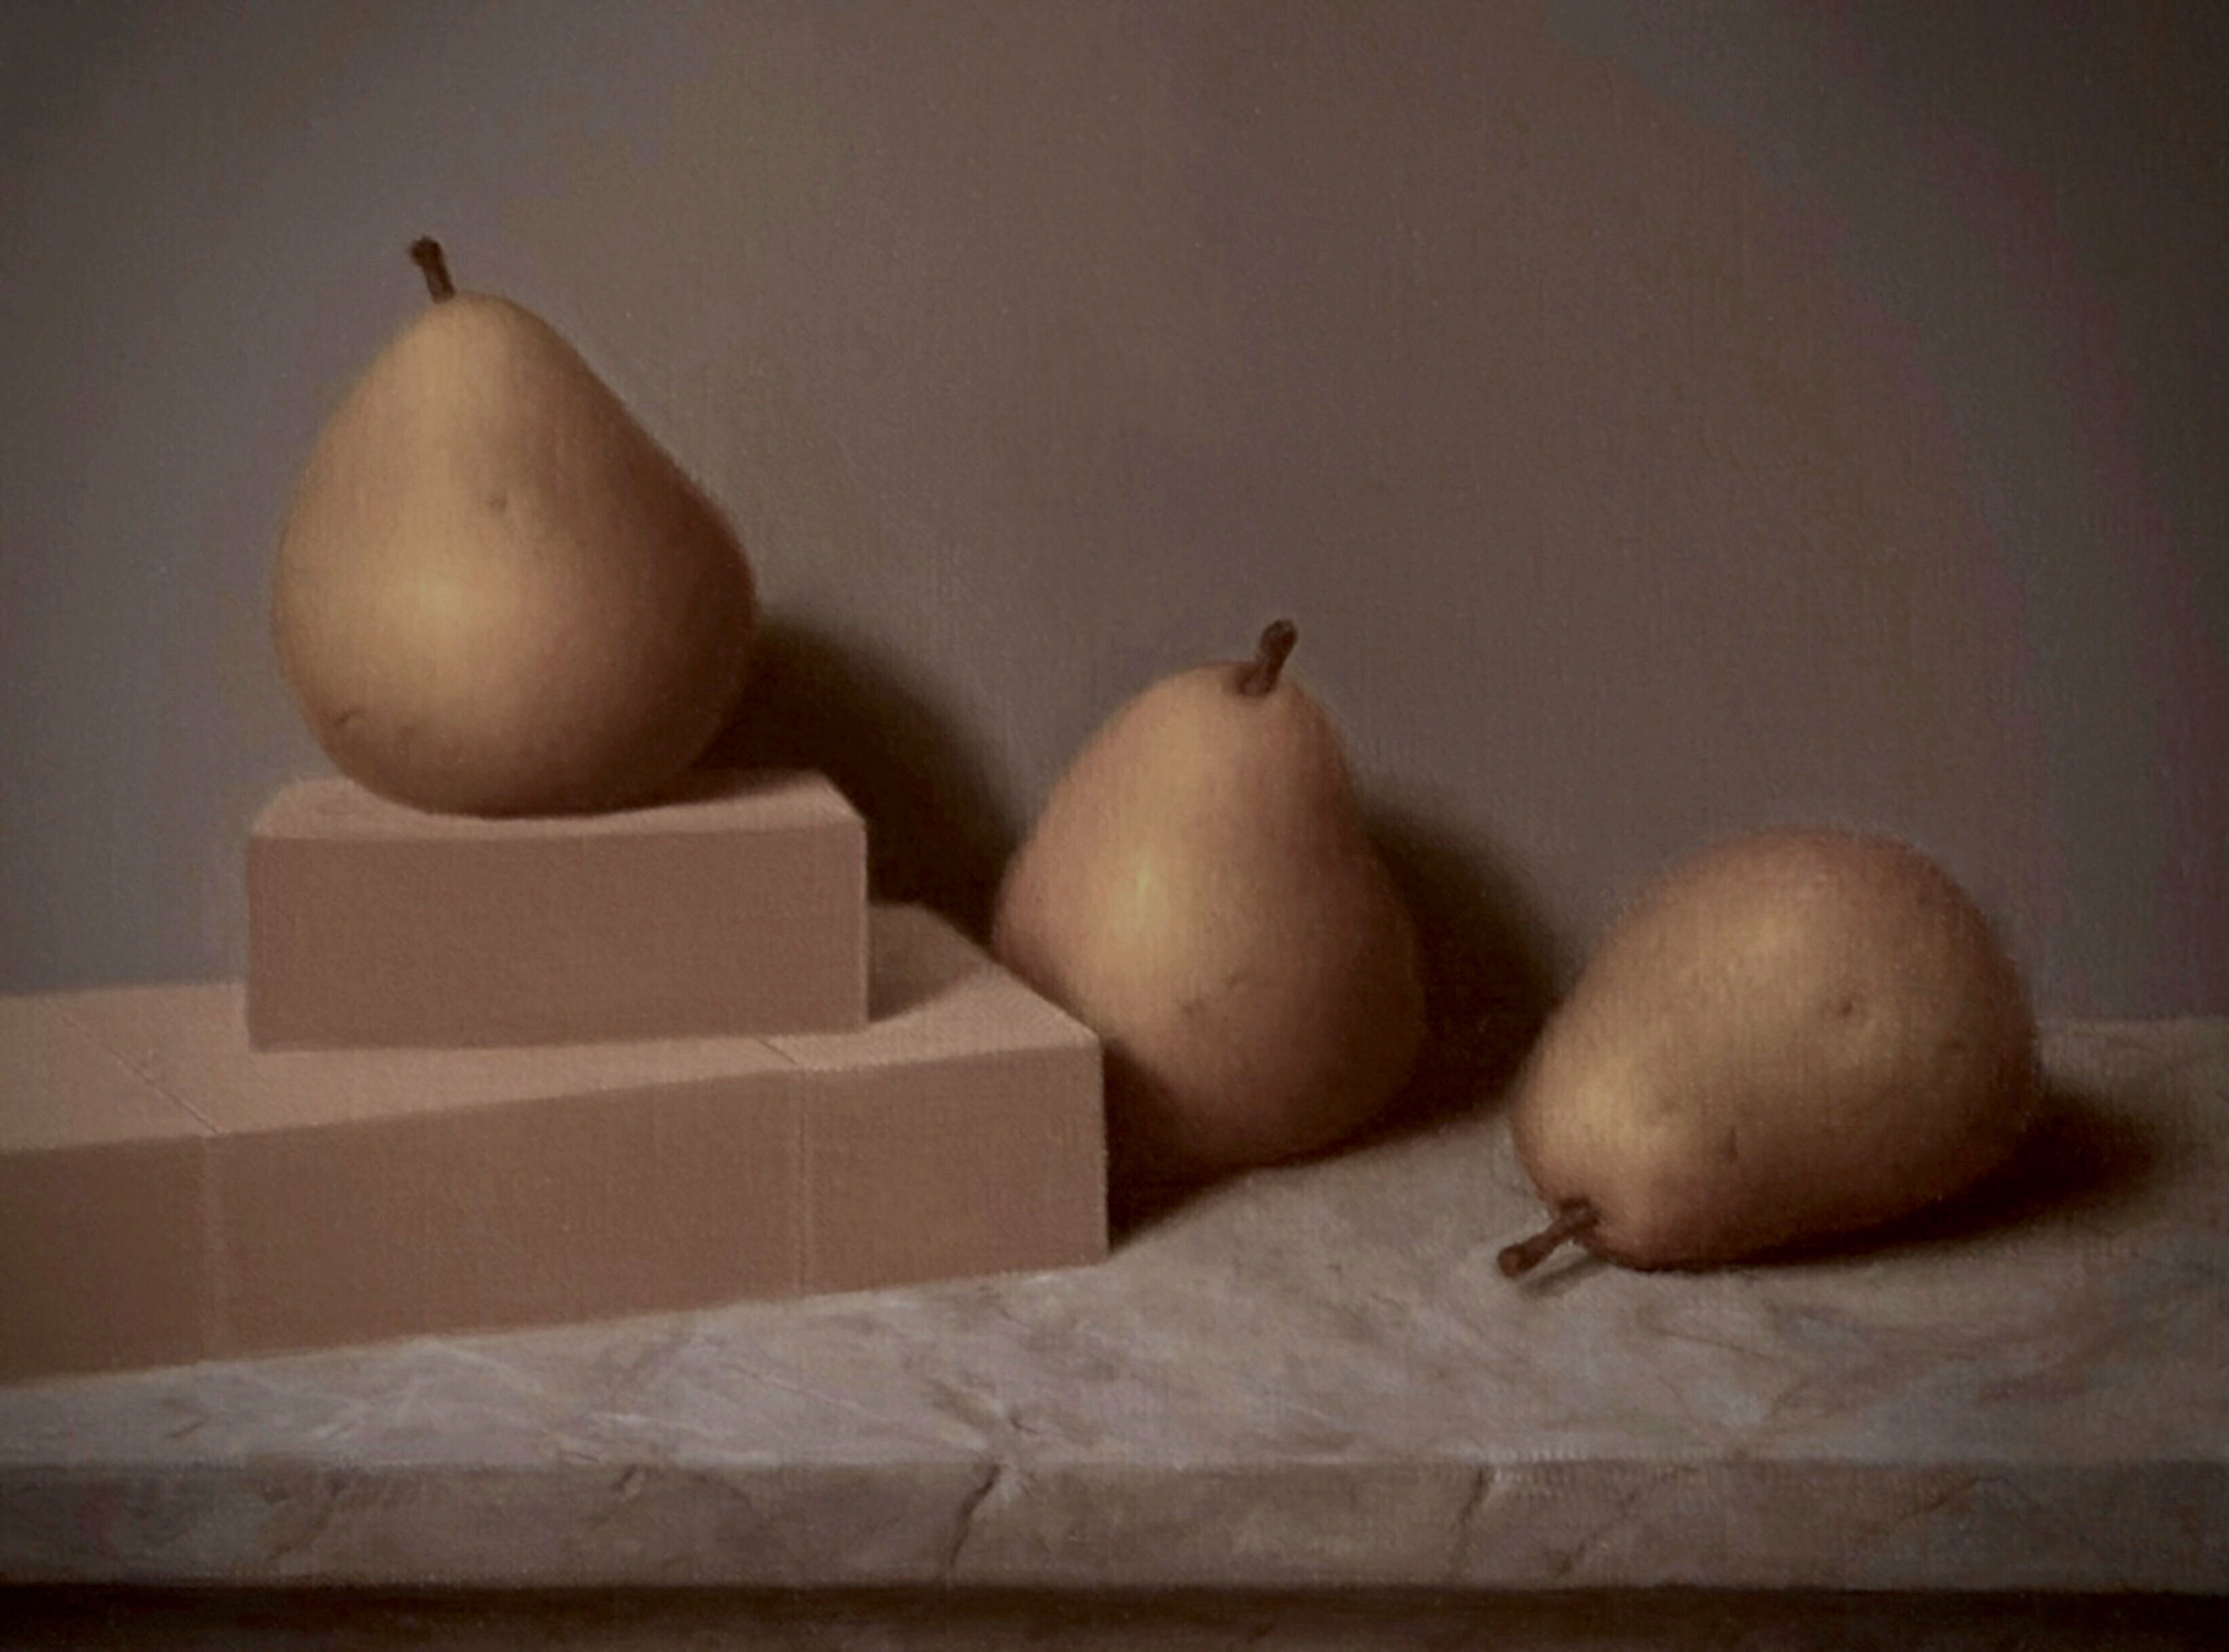 Ronald Weisberg; Pear 3, 2017, Original Painting Oil, 12 x 9 inches. Artwork description: 241 pears, marble table, wooden blocks ...